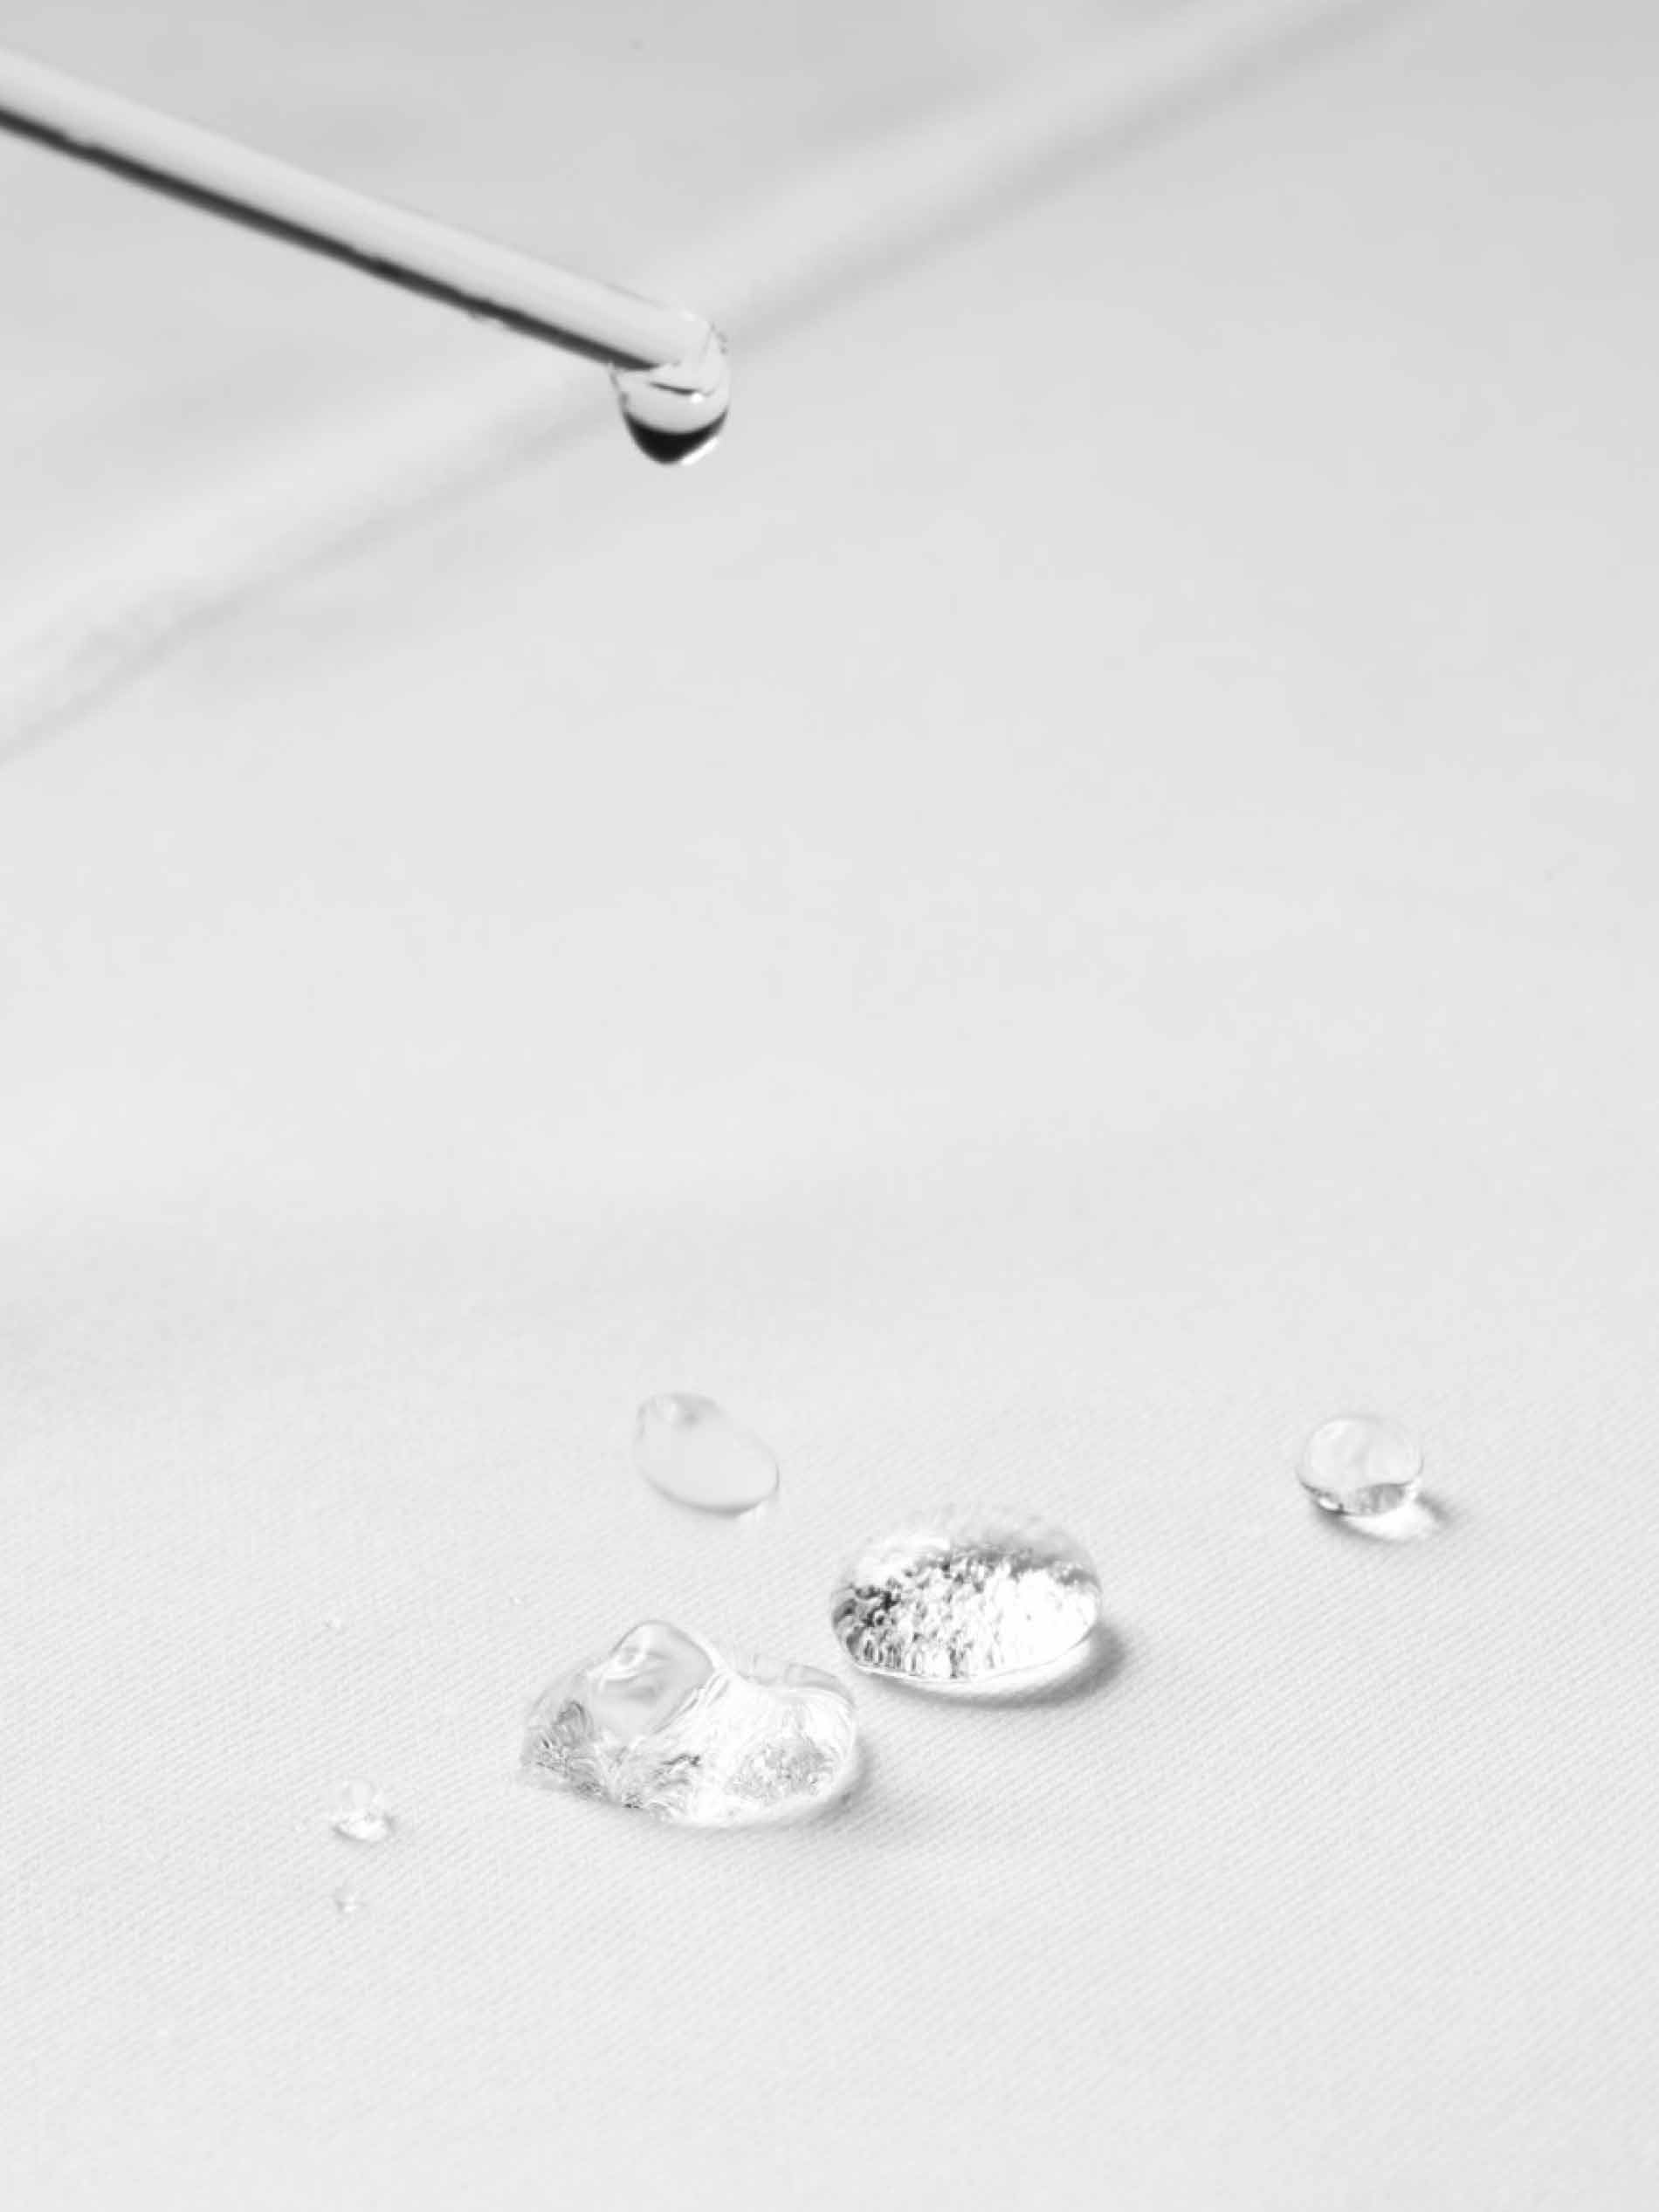 Water droplets collect on white fabric with hydrophobic properties | mey®